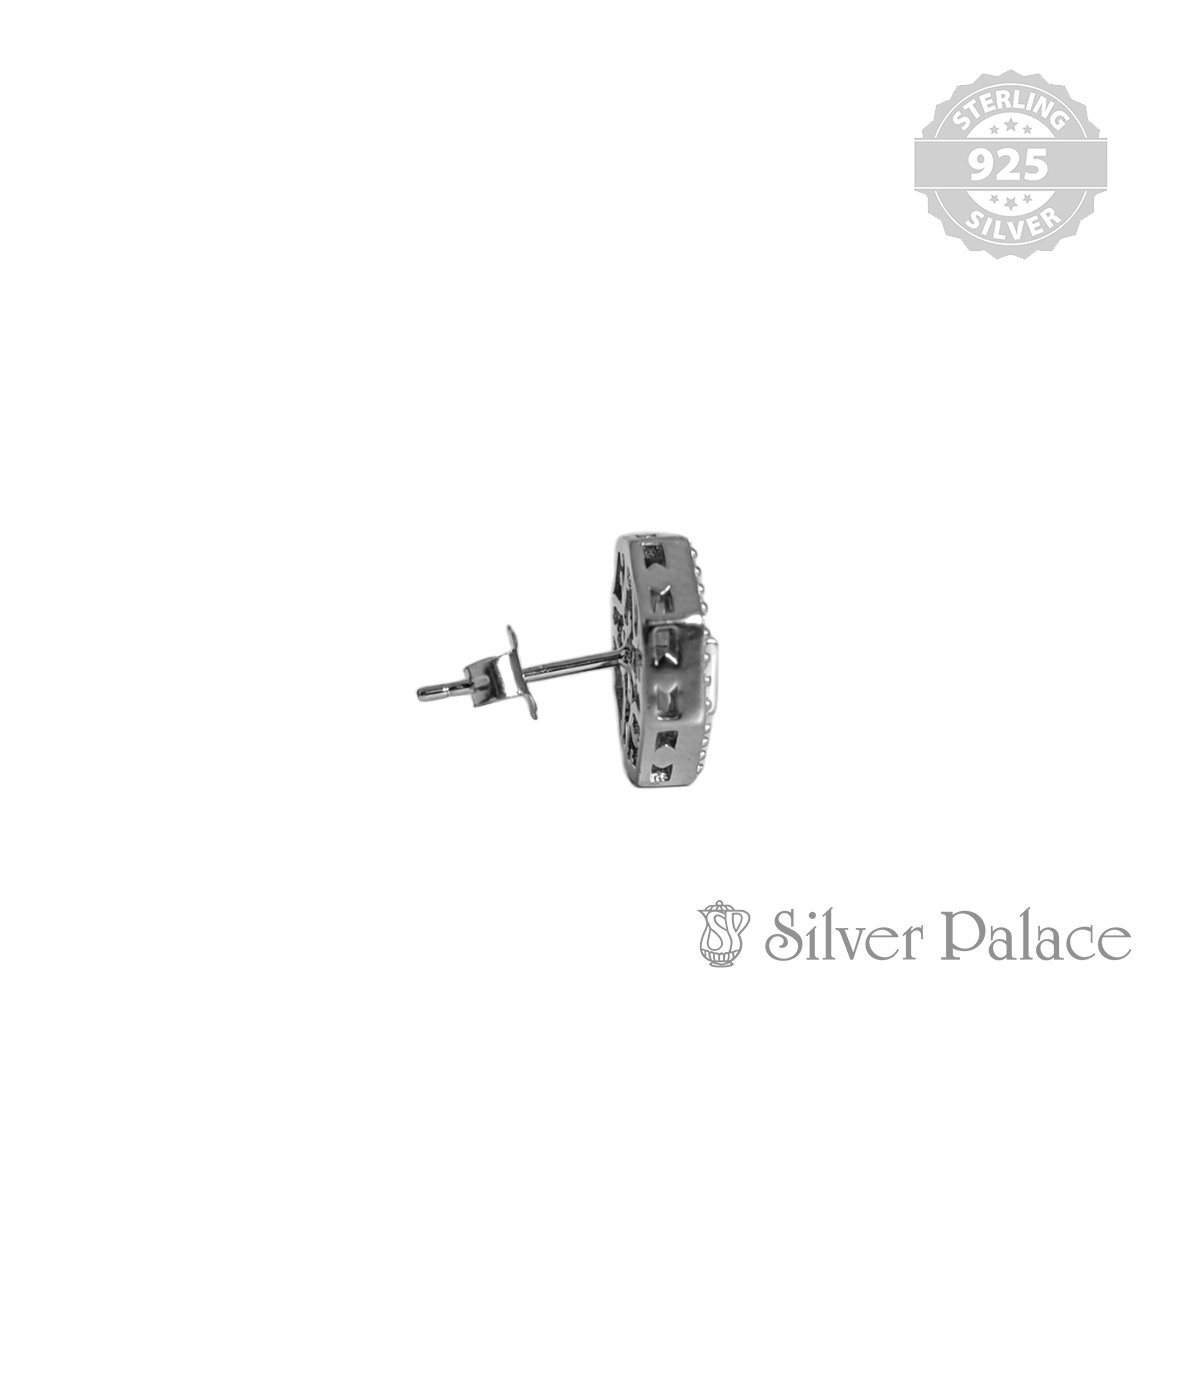 92.5 STERLING SILVER S STUD FOR GIRLS